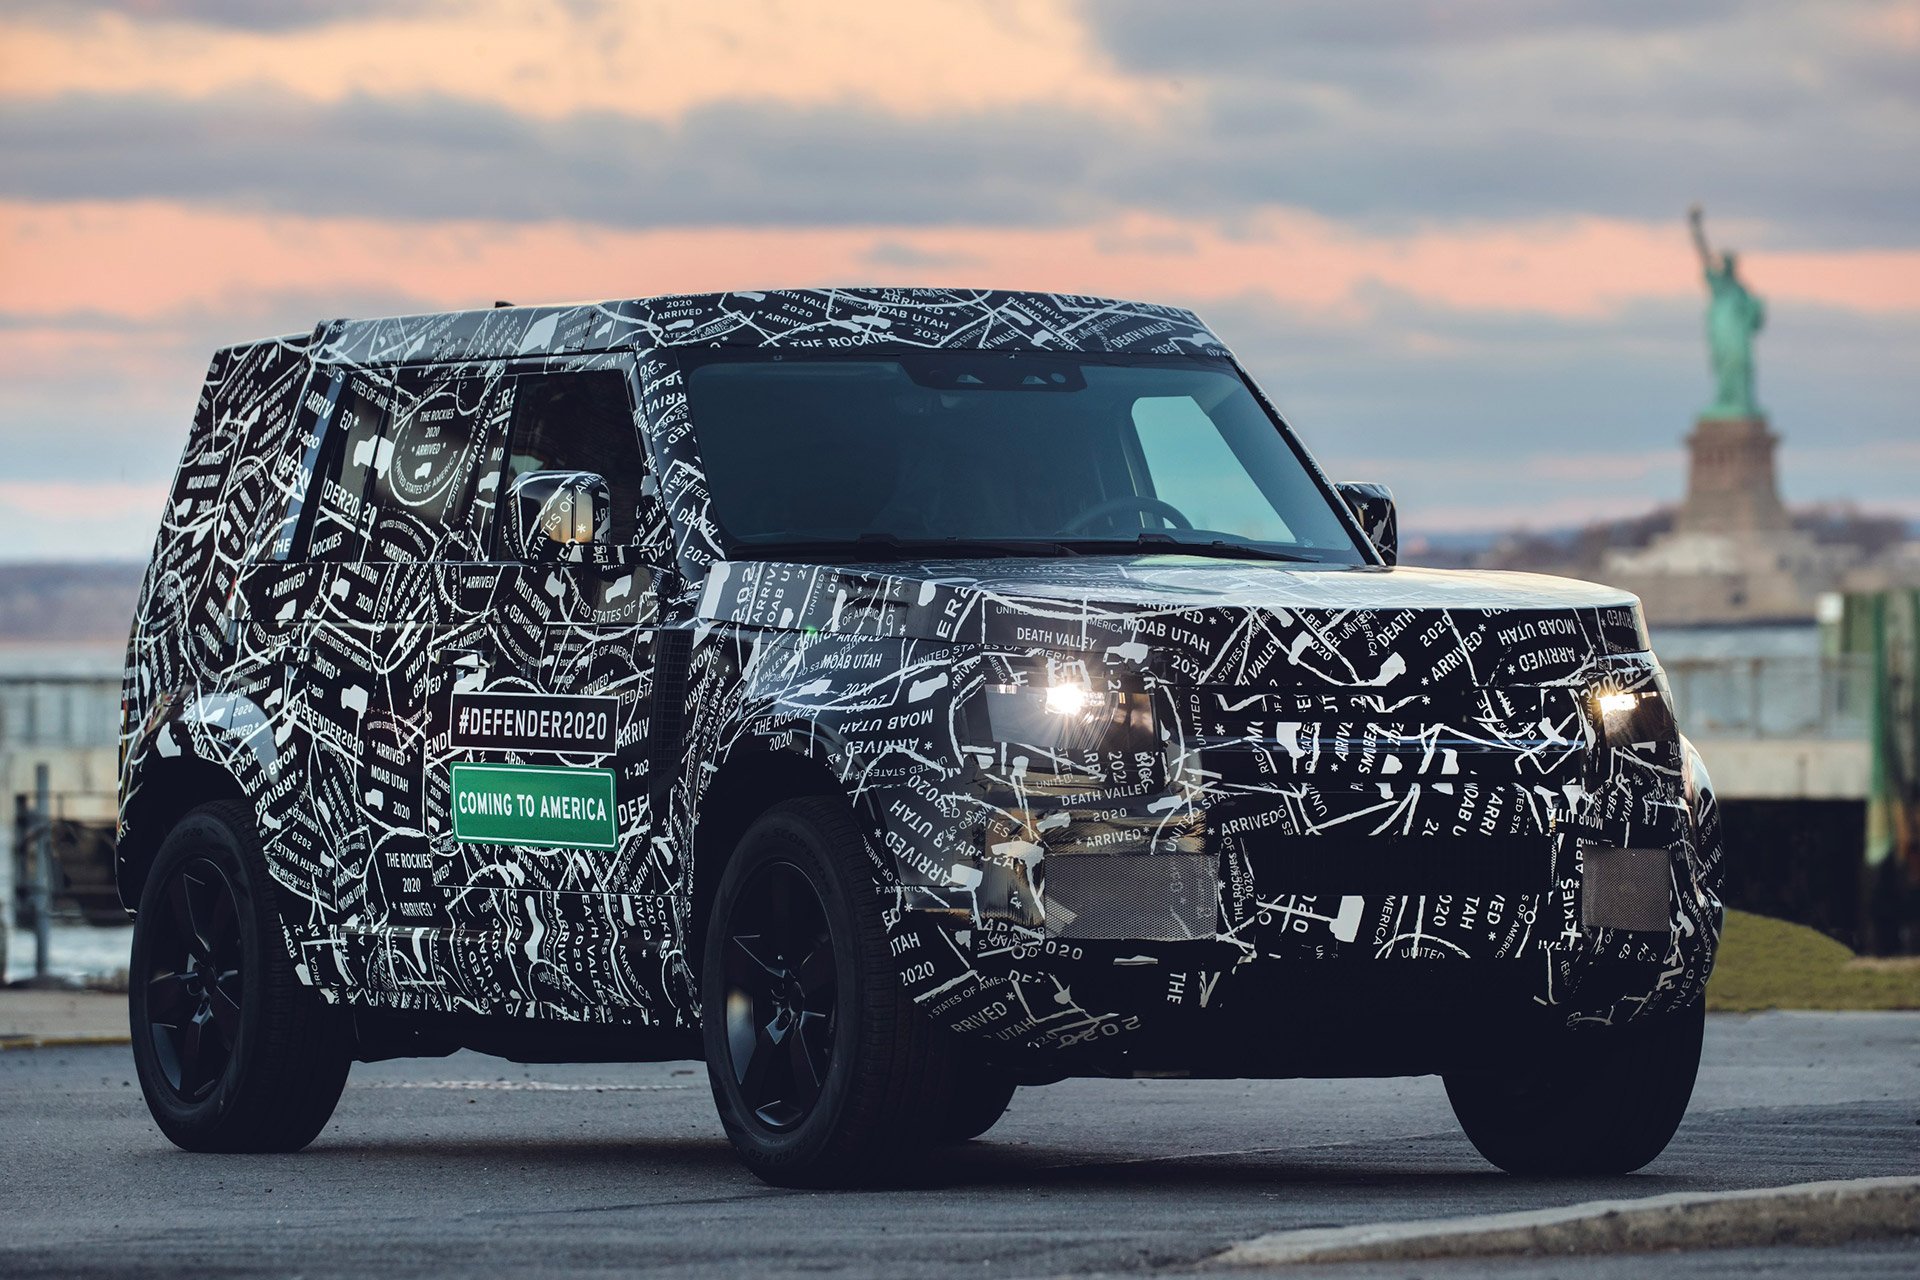 2020 Land Rover Defender Teased, Coming to North America